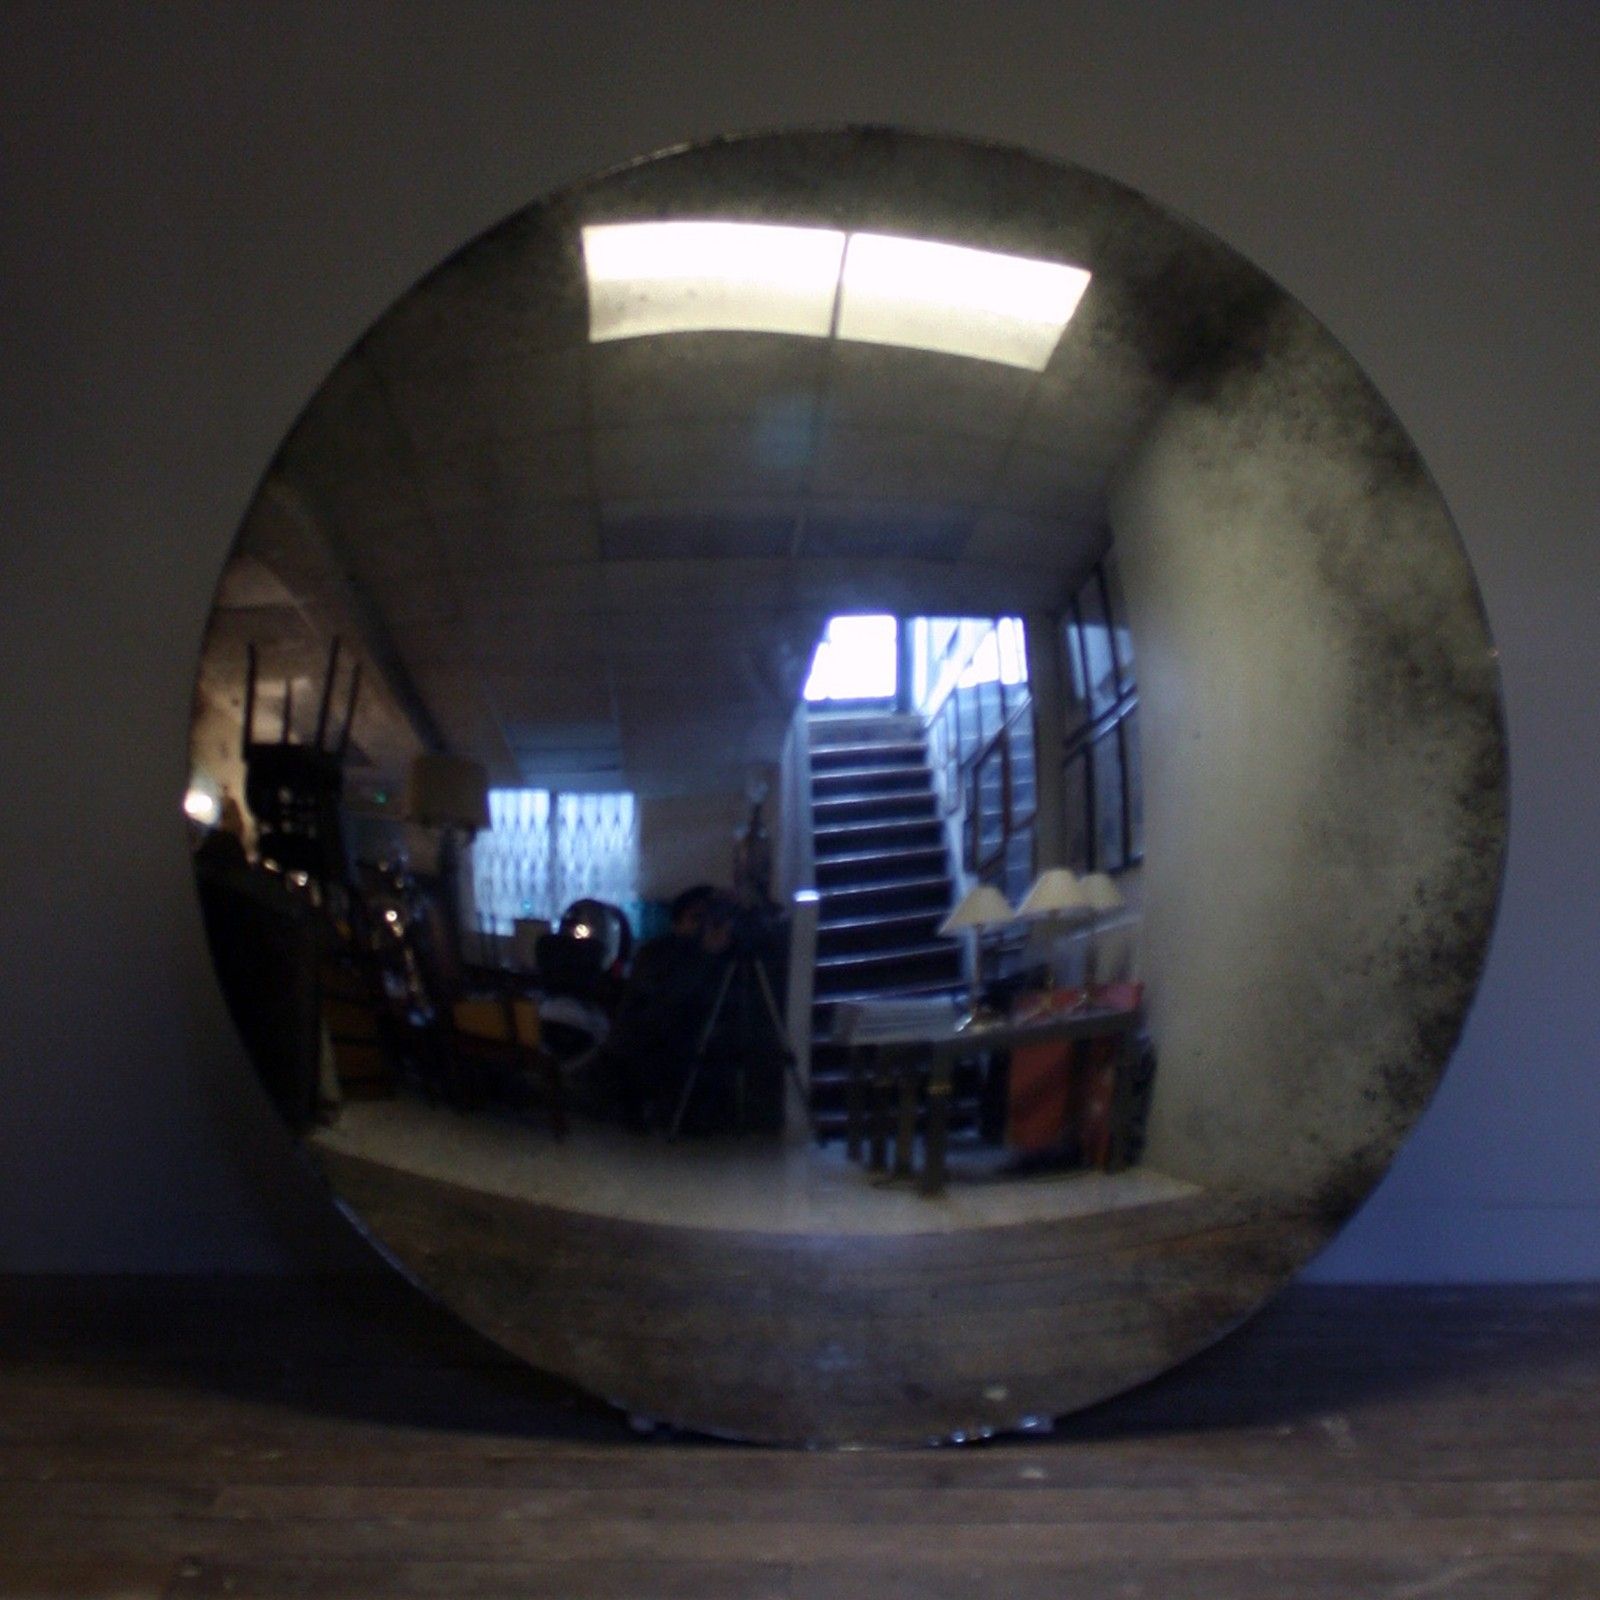 Massive Convex Mirror Decorative Collective Pertaining To Large Convex Mirror (View 3 of 15)